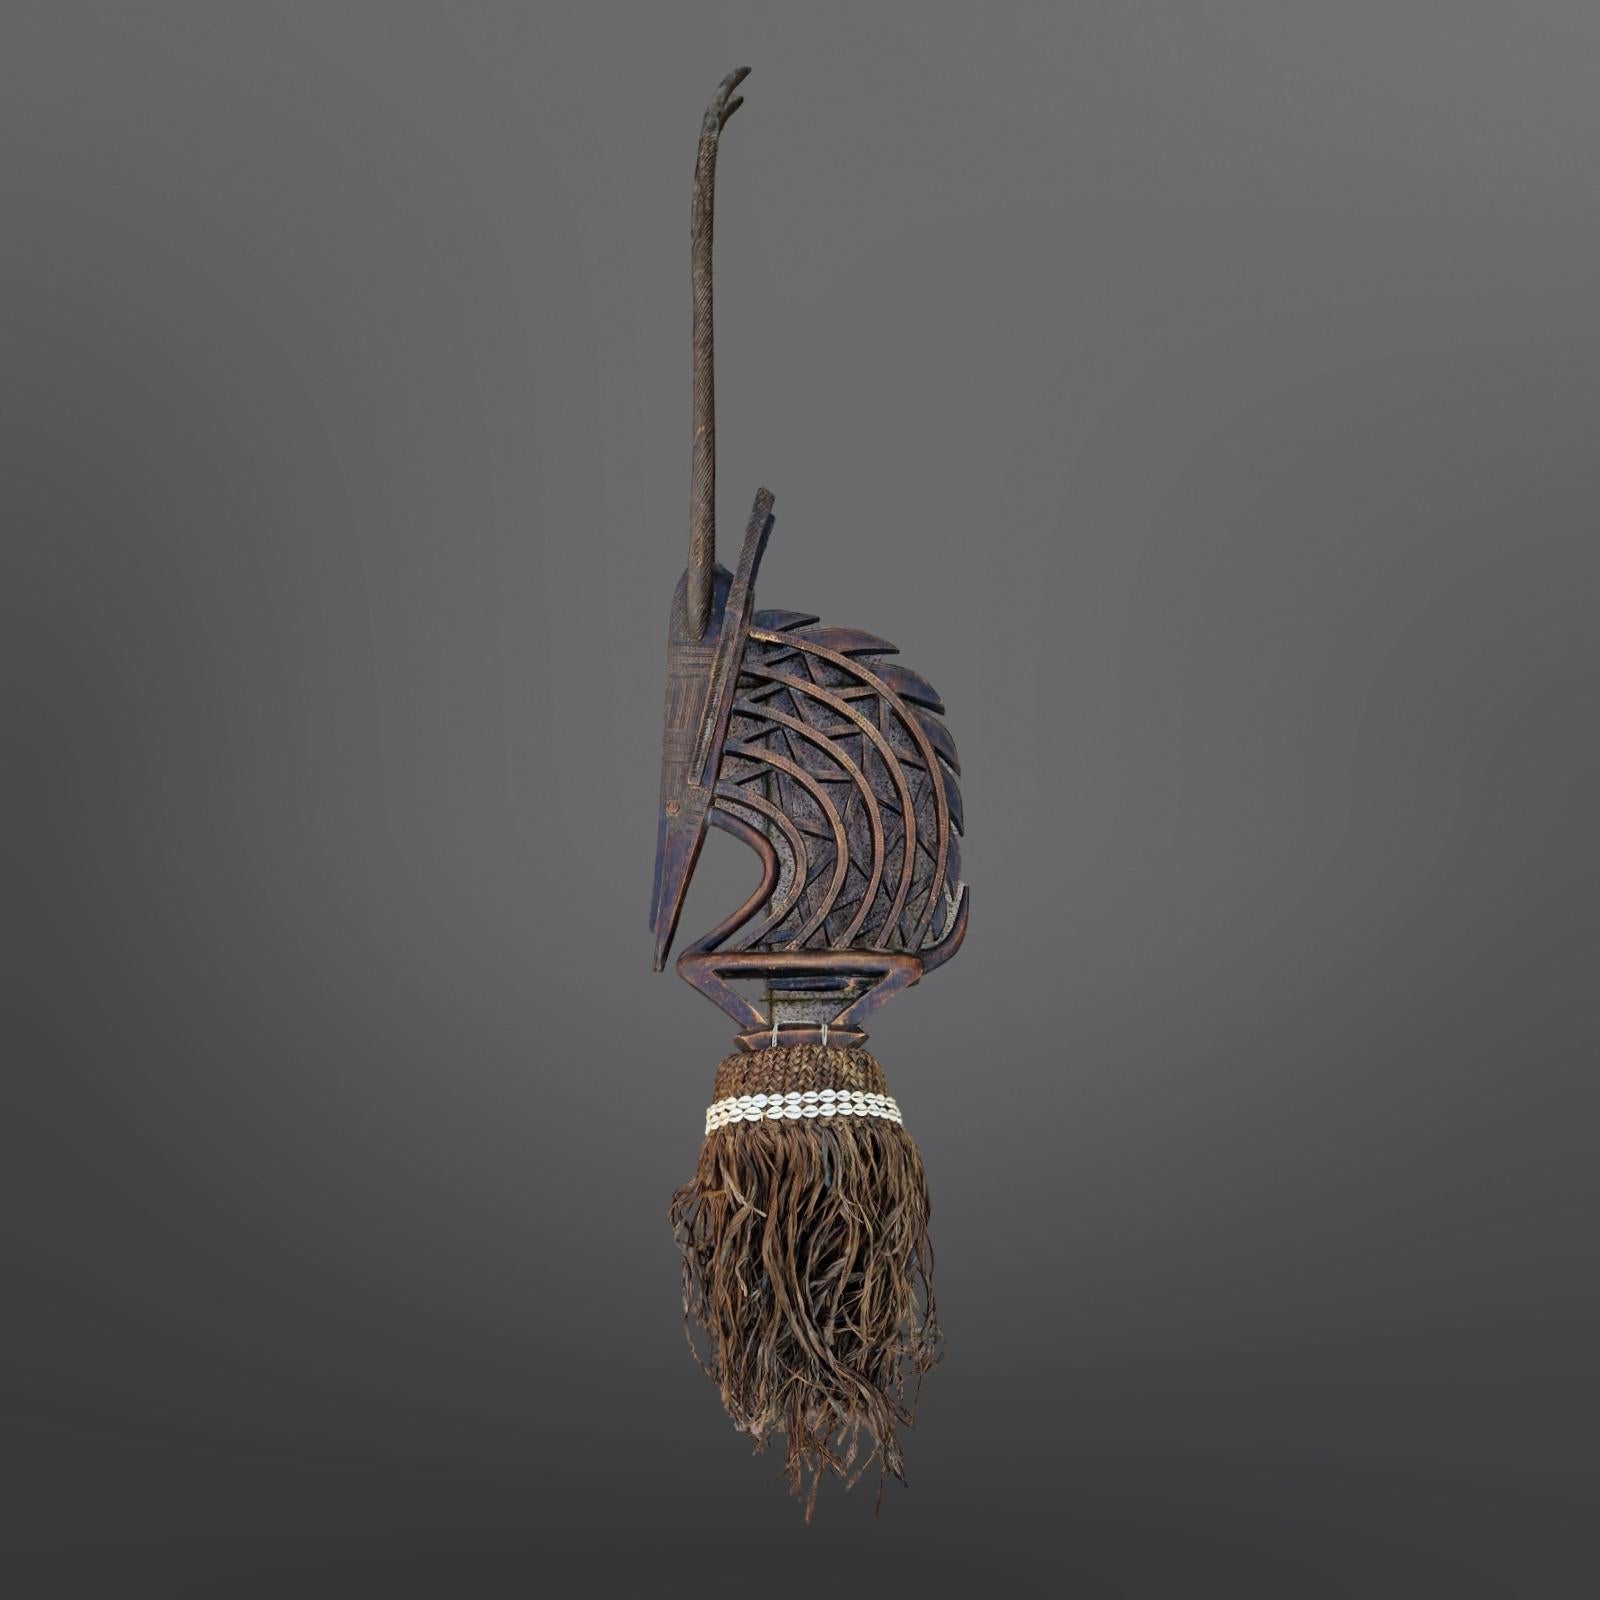 This ceremonial headdress was handmade from a single piece of wood by the skillful hands of a member of the Bamana tribe originating from Mali, West Africa. It was brought to The Netherlands by the former owner in the late 60s but was probably made